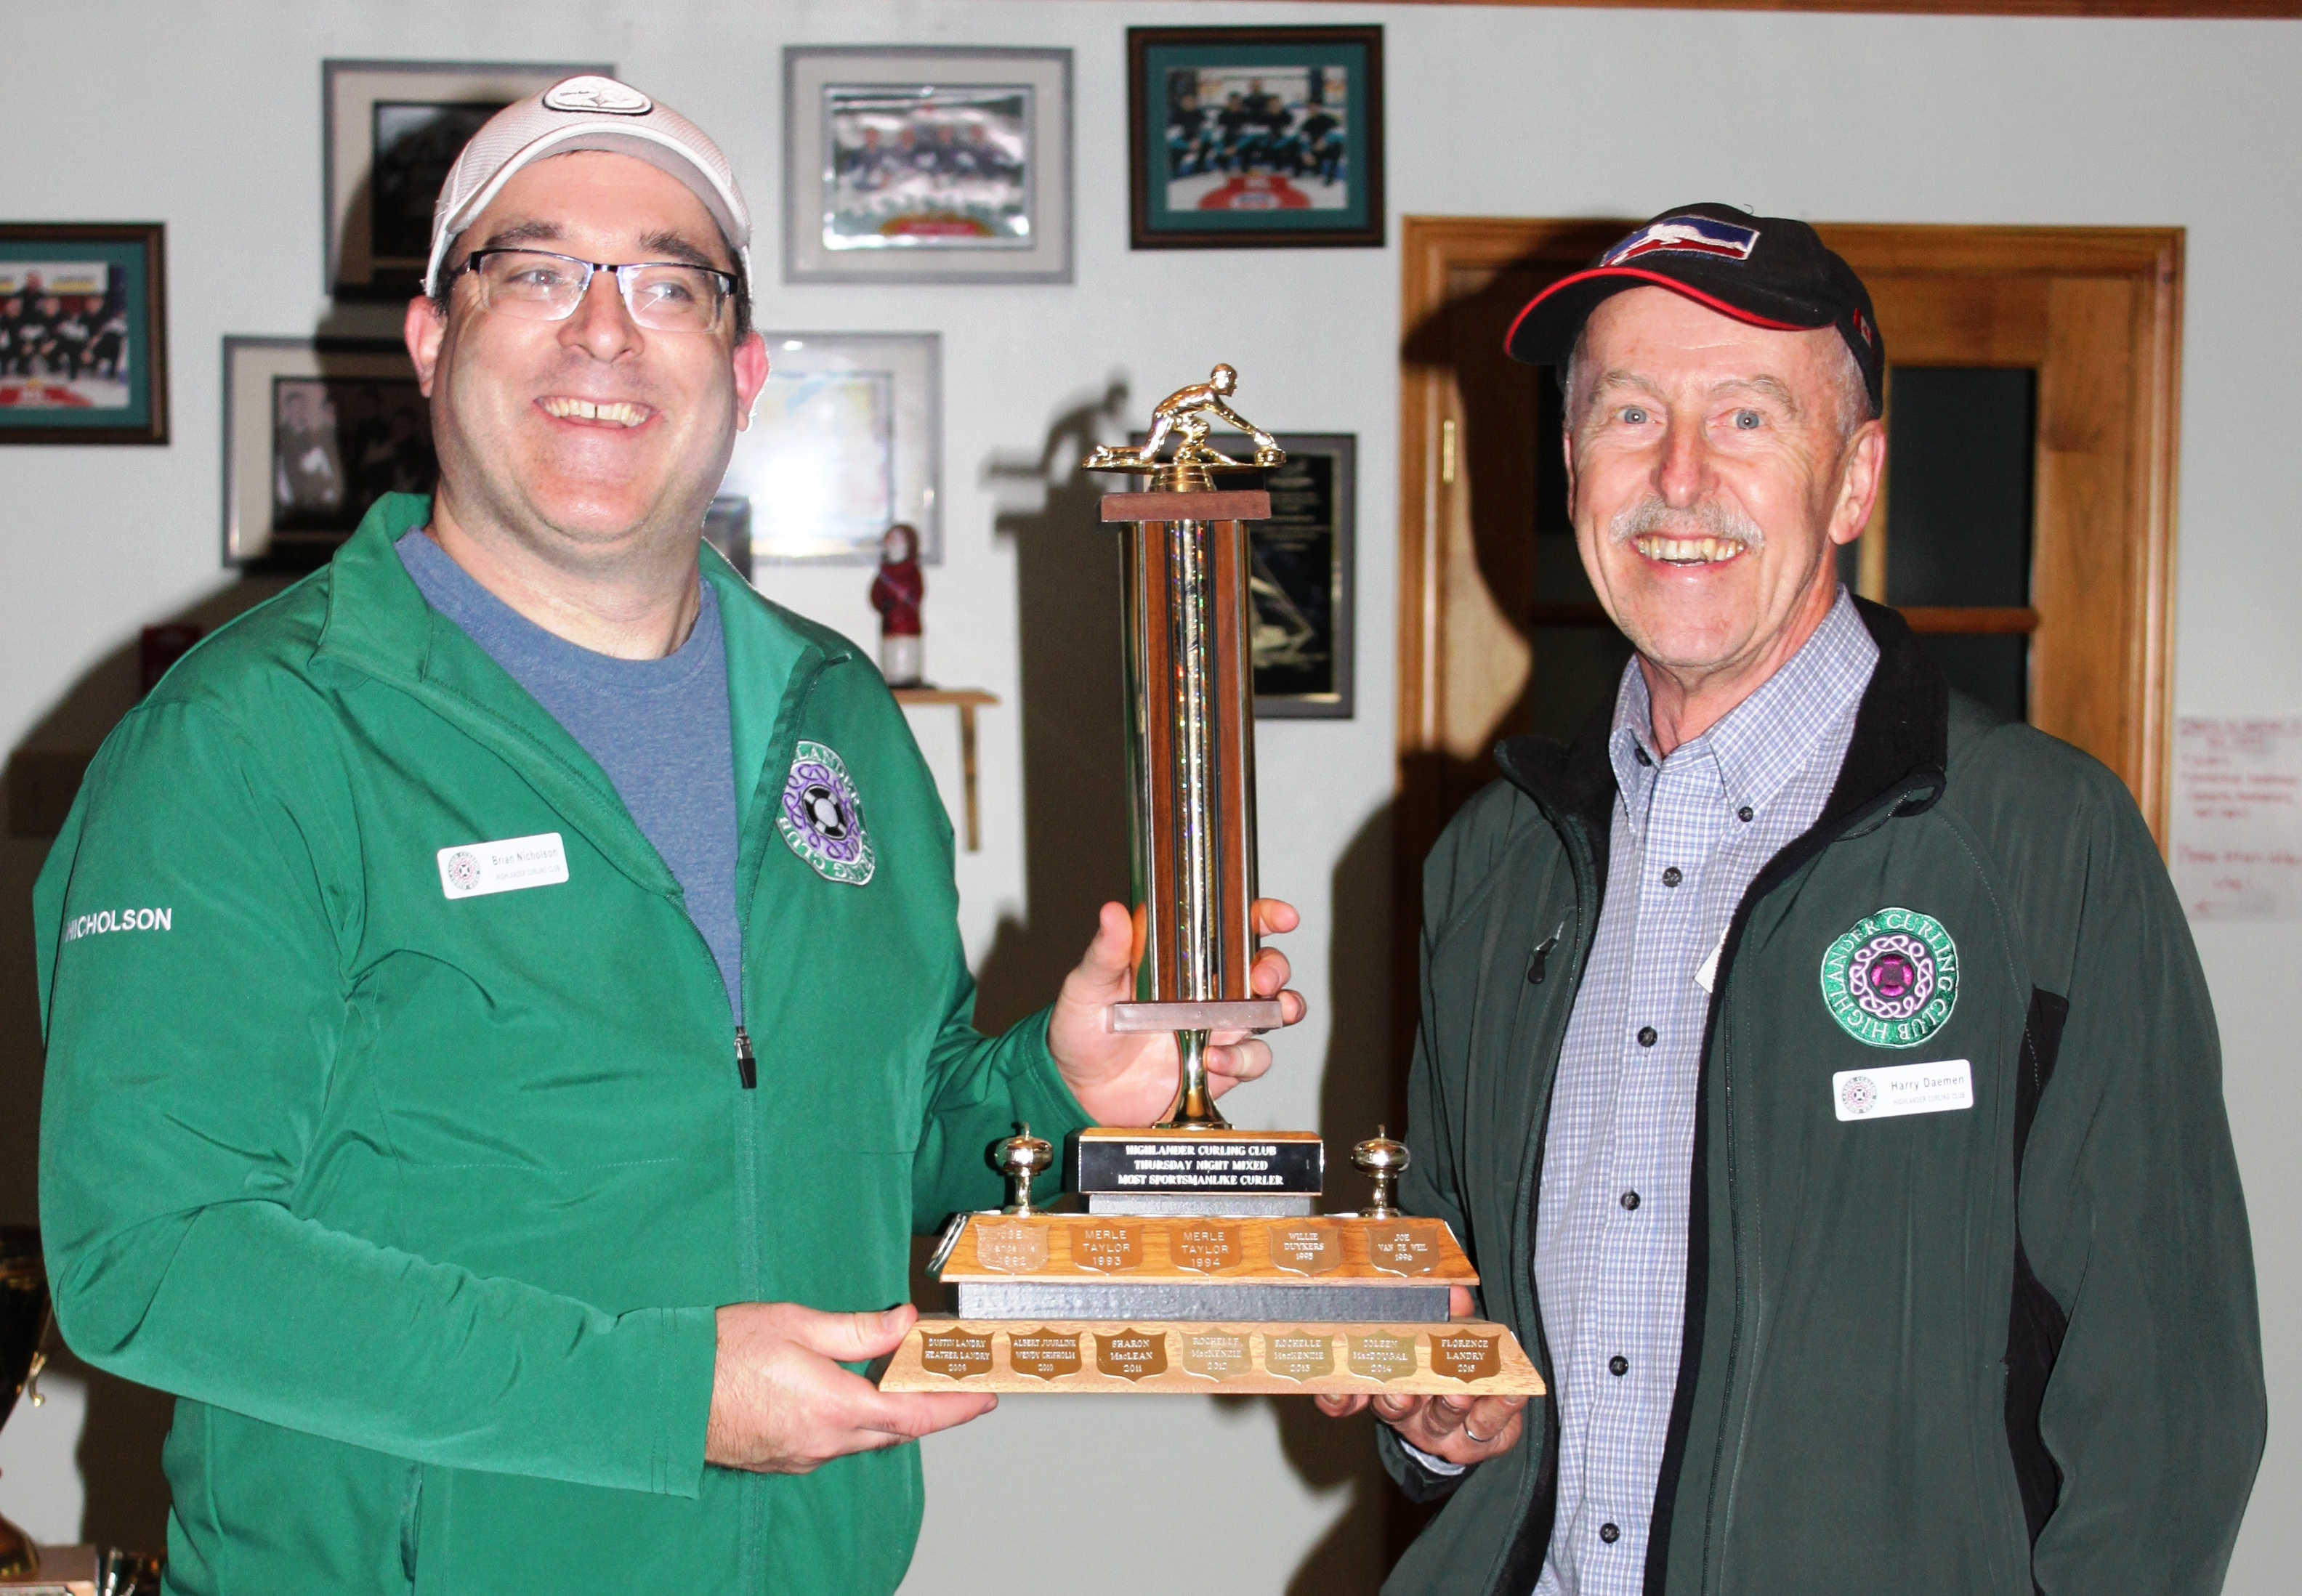 Thursday Night Mixed Most Sportsmanlike: Brian Nicholson (left)
Presented by Harry Daemen (right)